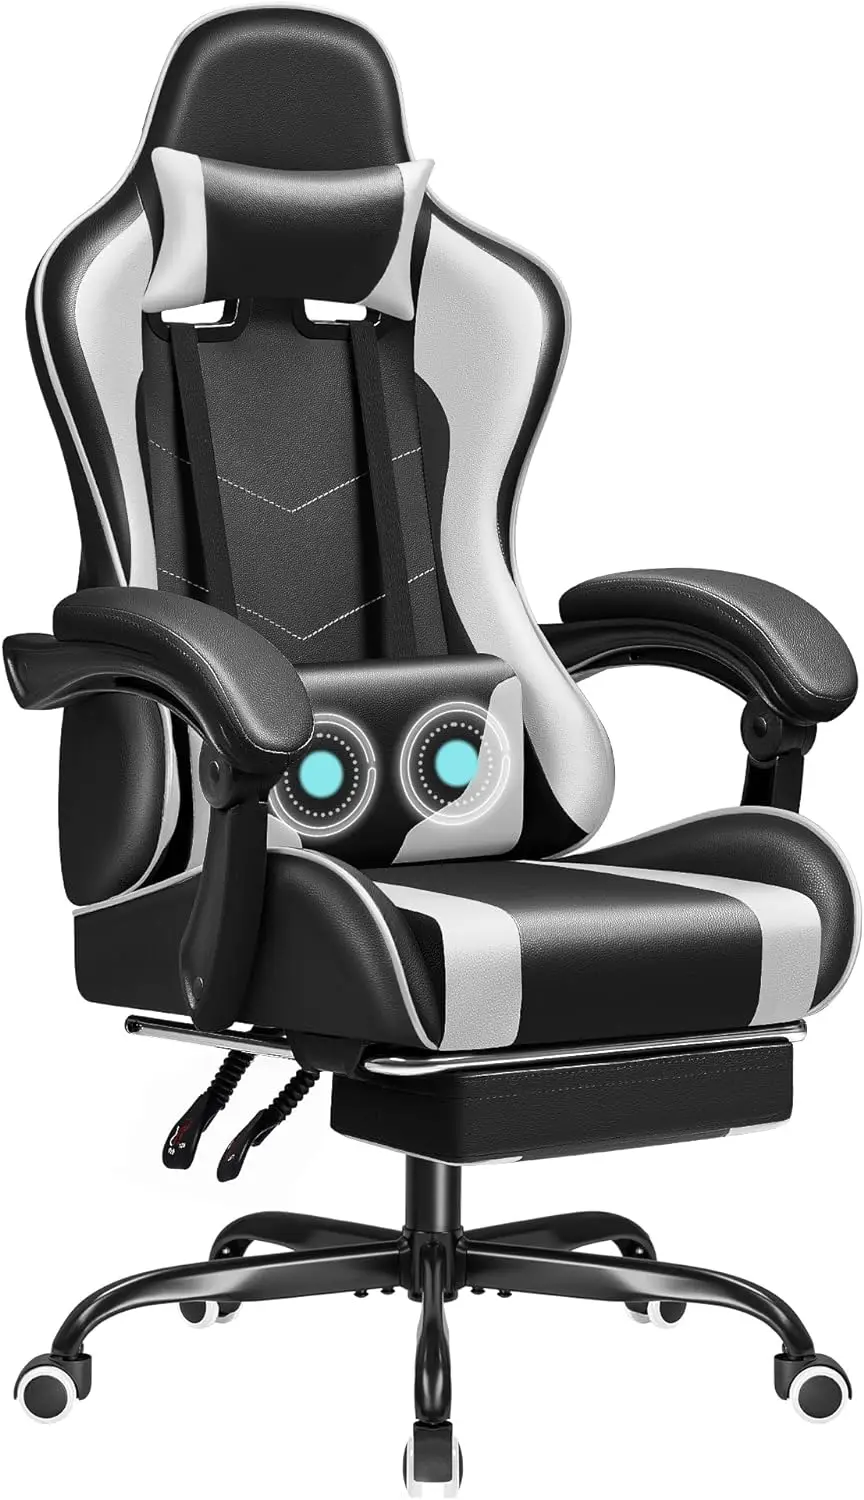 JUMMICO Gaming Chair Ergonomic Computer Chair with Footrest and Massage Lumbar Support, Height Adjustable Video Gaming